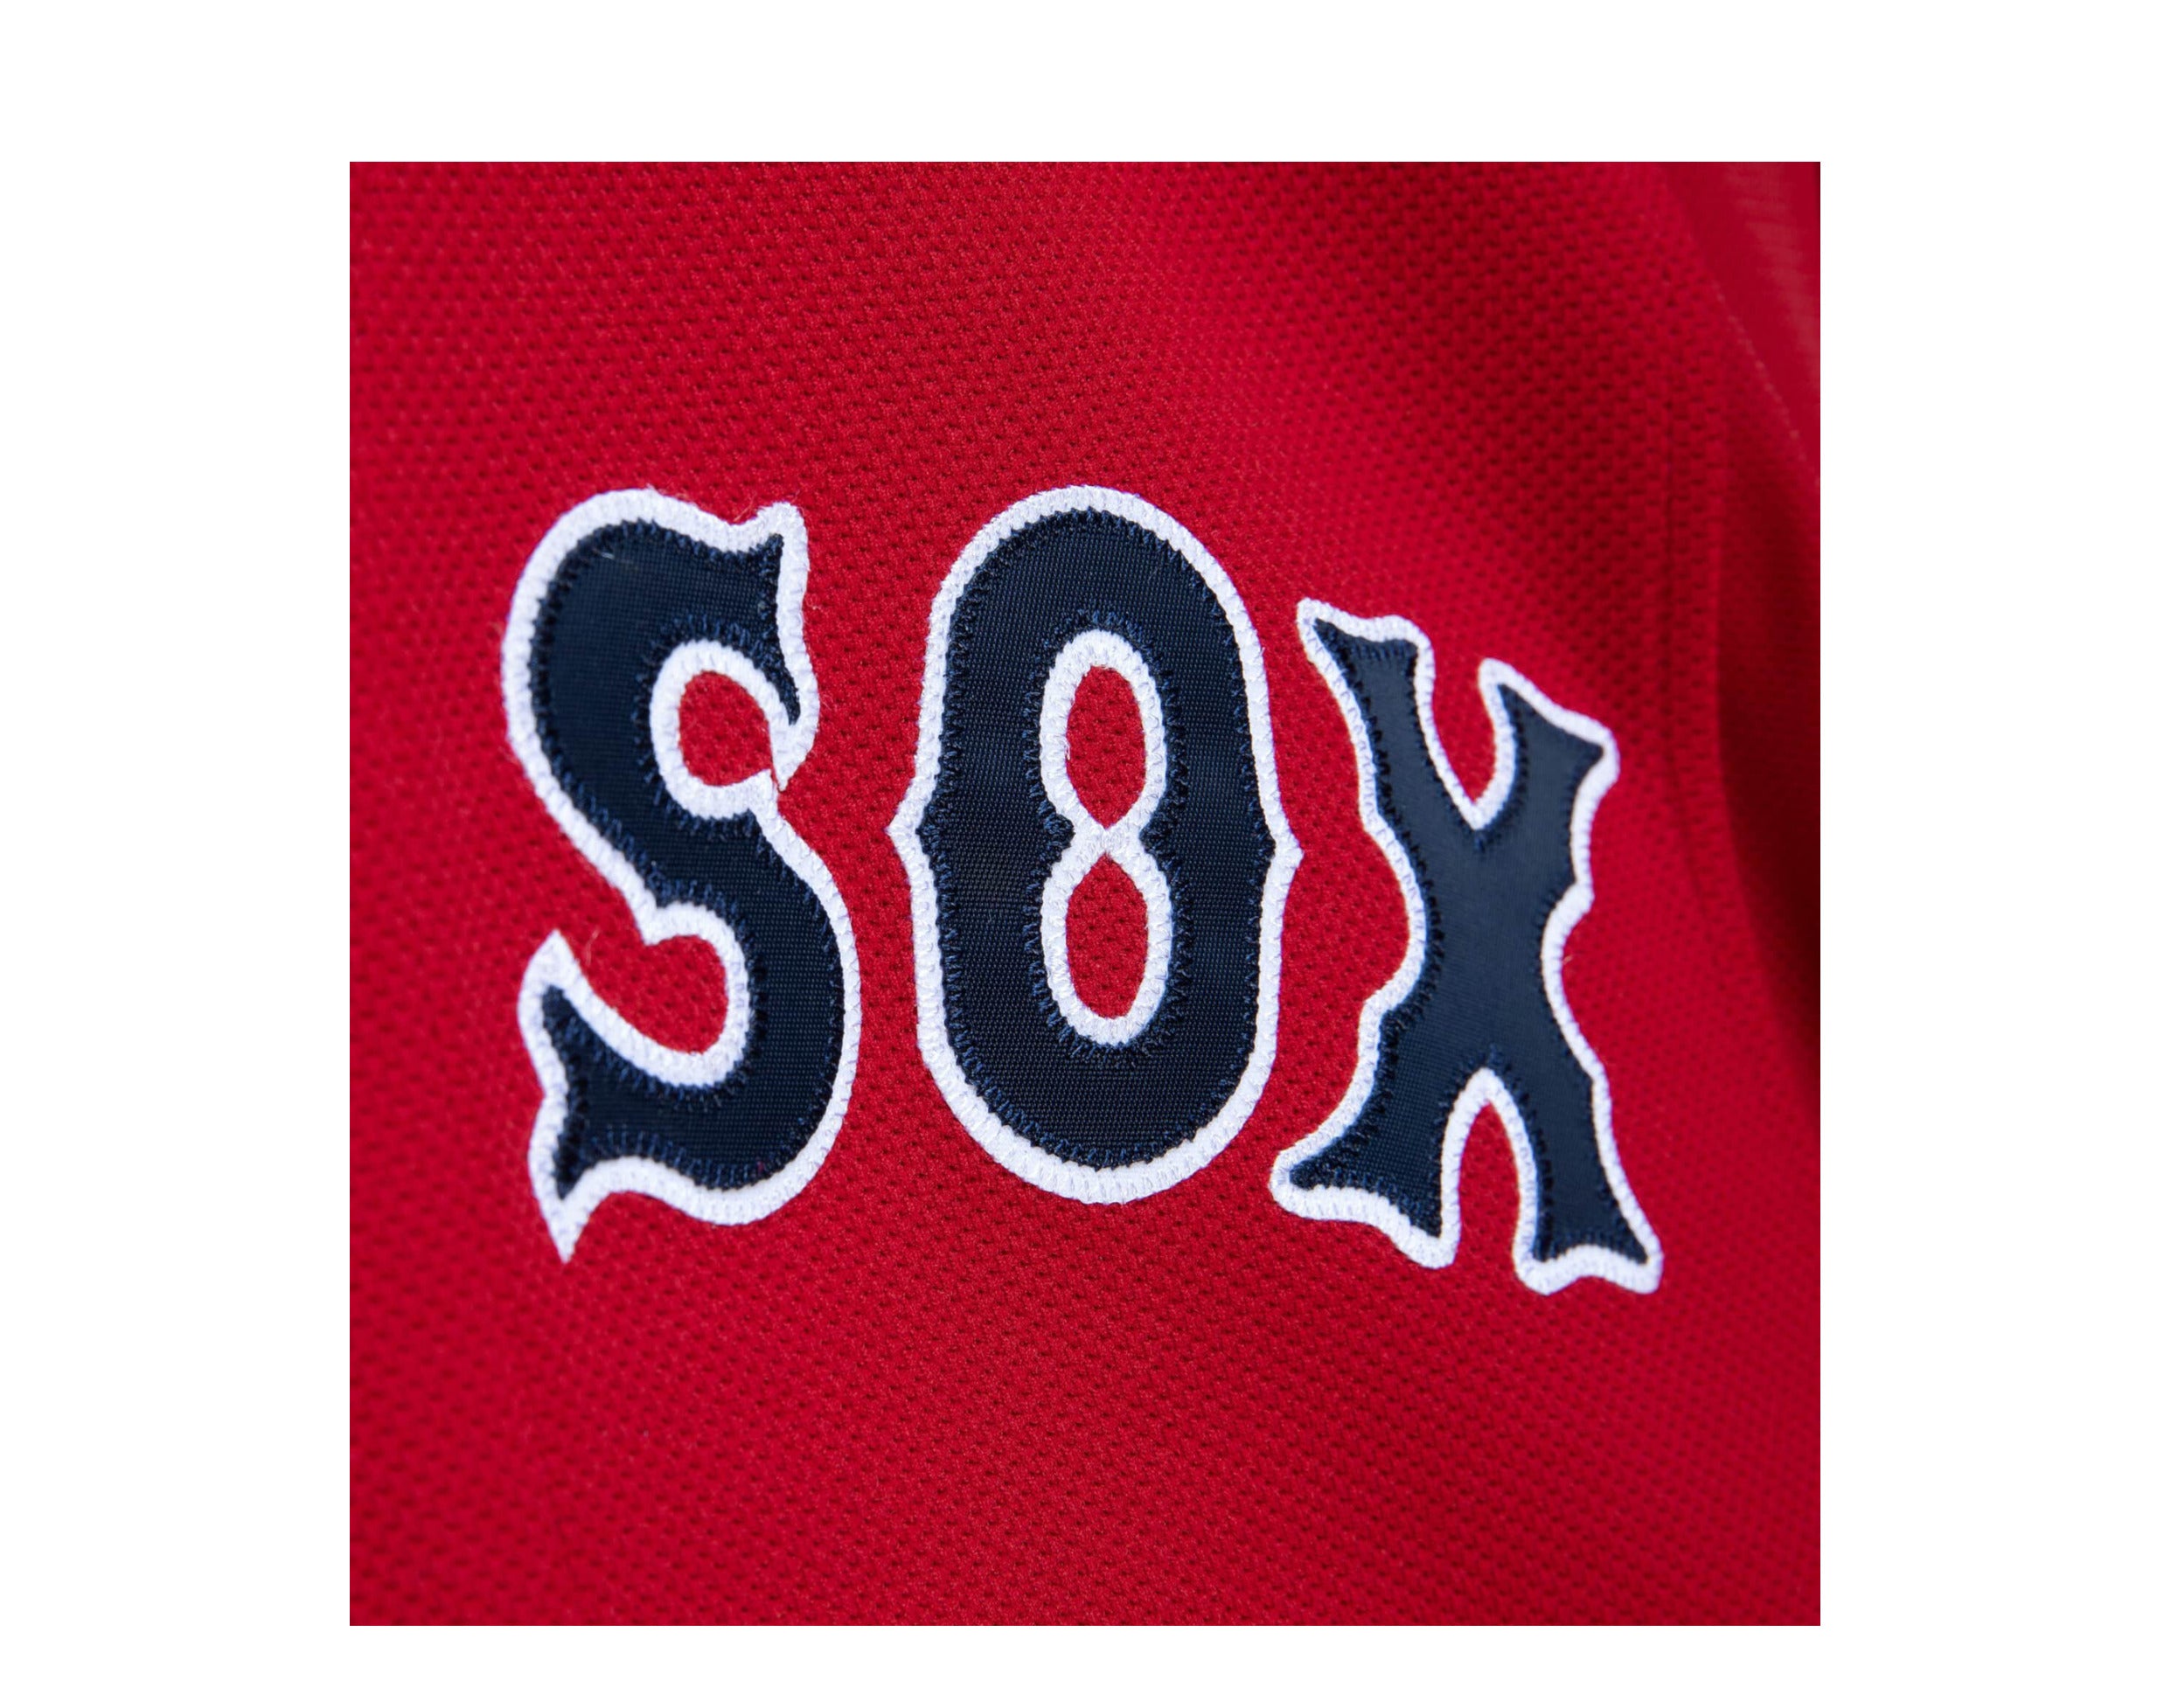 Men's Mitchell & Ness David Ortiz White Boston Red Sox Big & Tall Home  Authentic Player Jersey